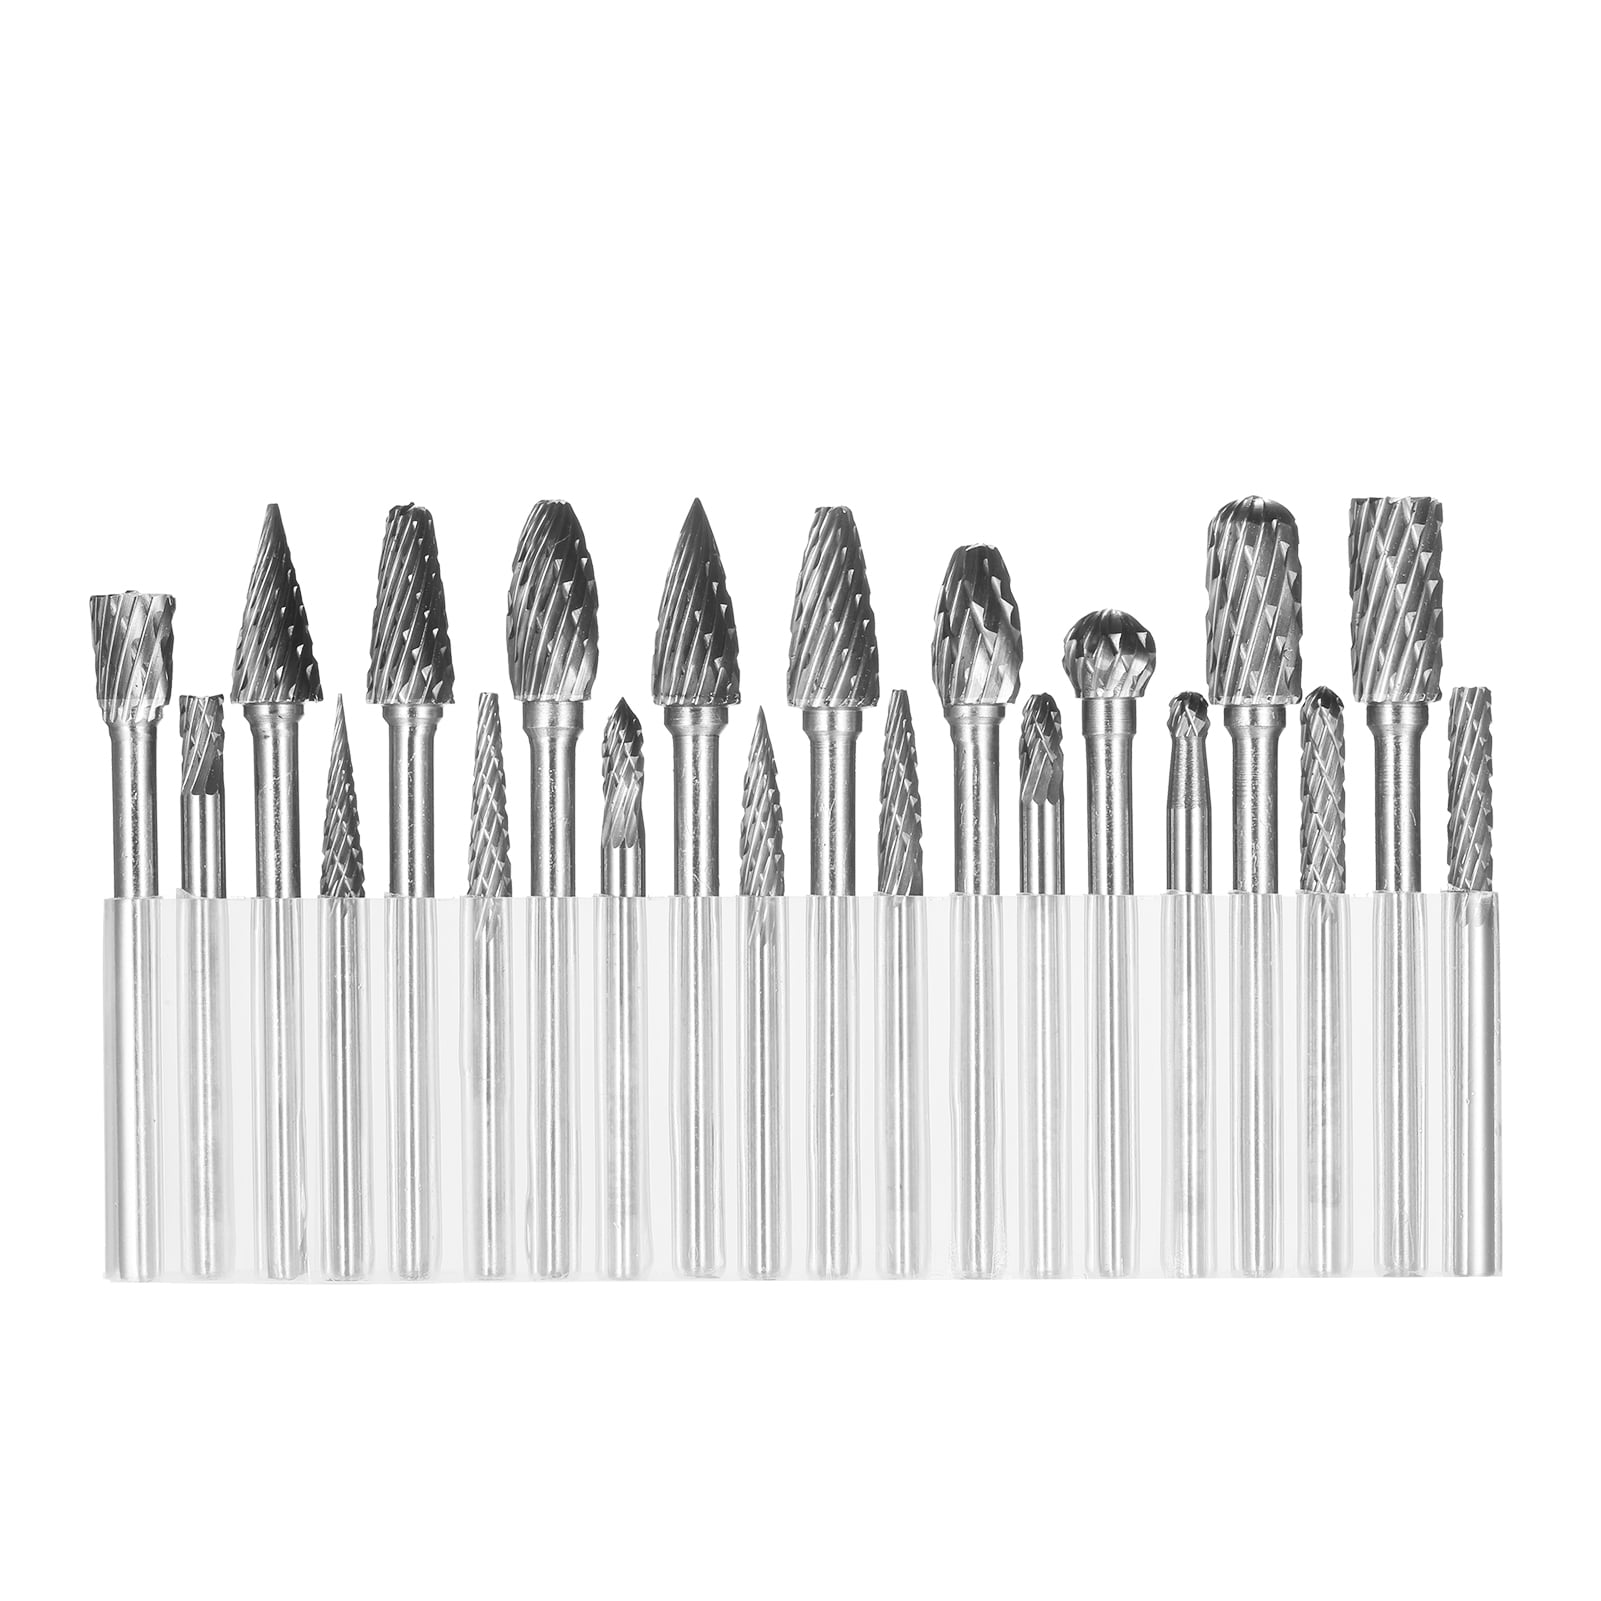 Double Cut Titanium Carbide Rotary Burr Set -10 Pieces 1/8 Inch Head Sizetungsten Steel,for Wood Shank and 1/4 Inch m 6 Mm 